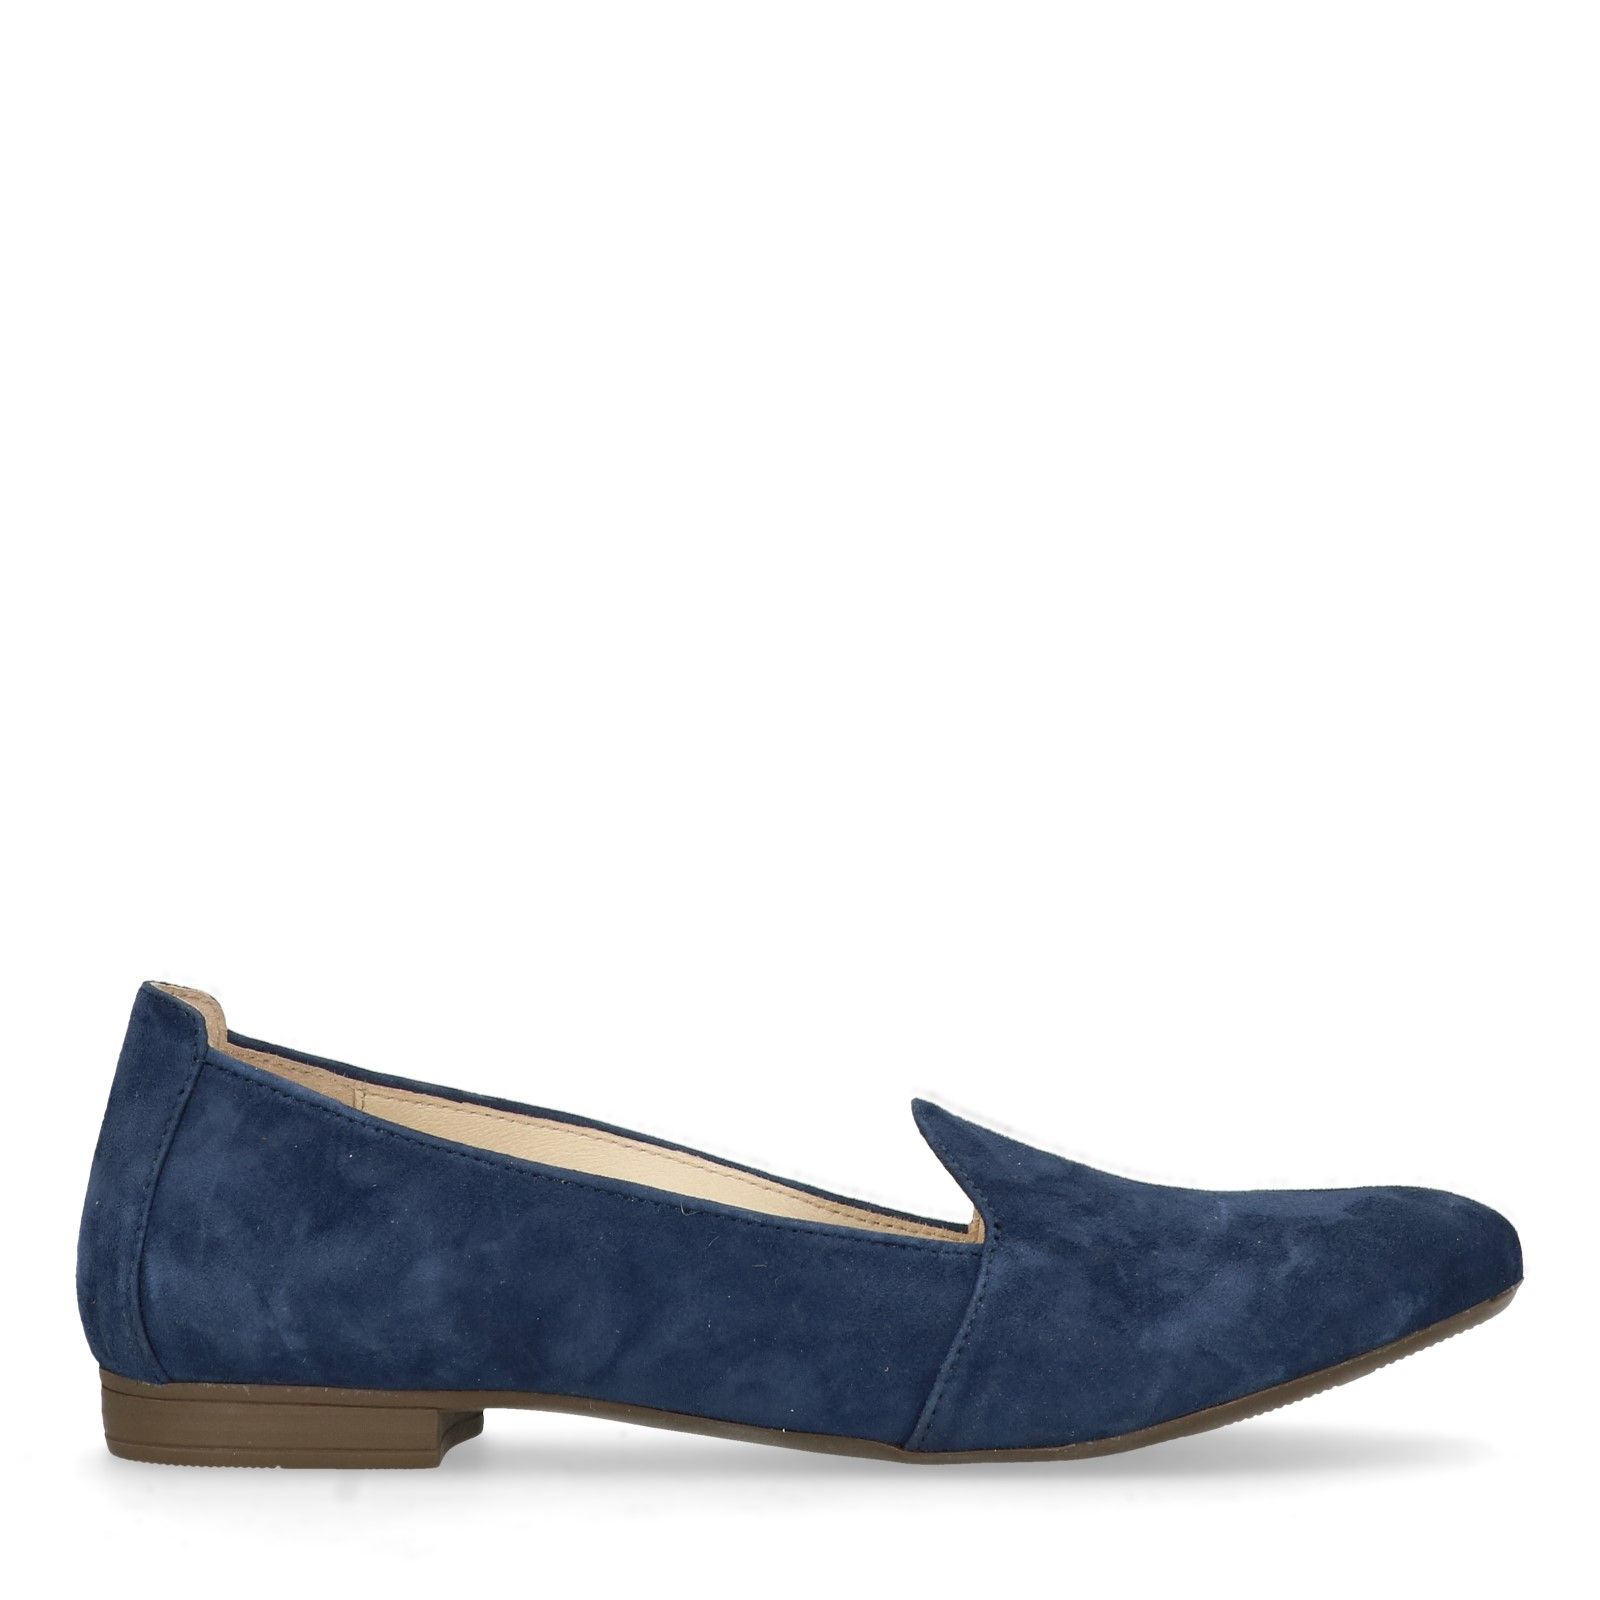 Schoenen Pumps Loafers Bally Loafers blauw casual uitstraling 